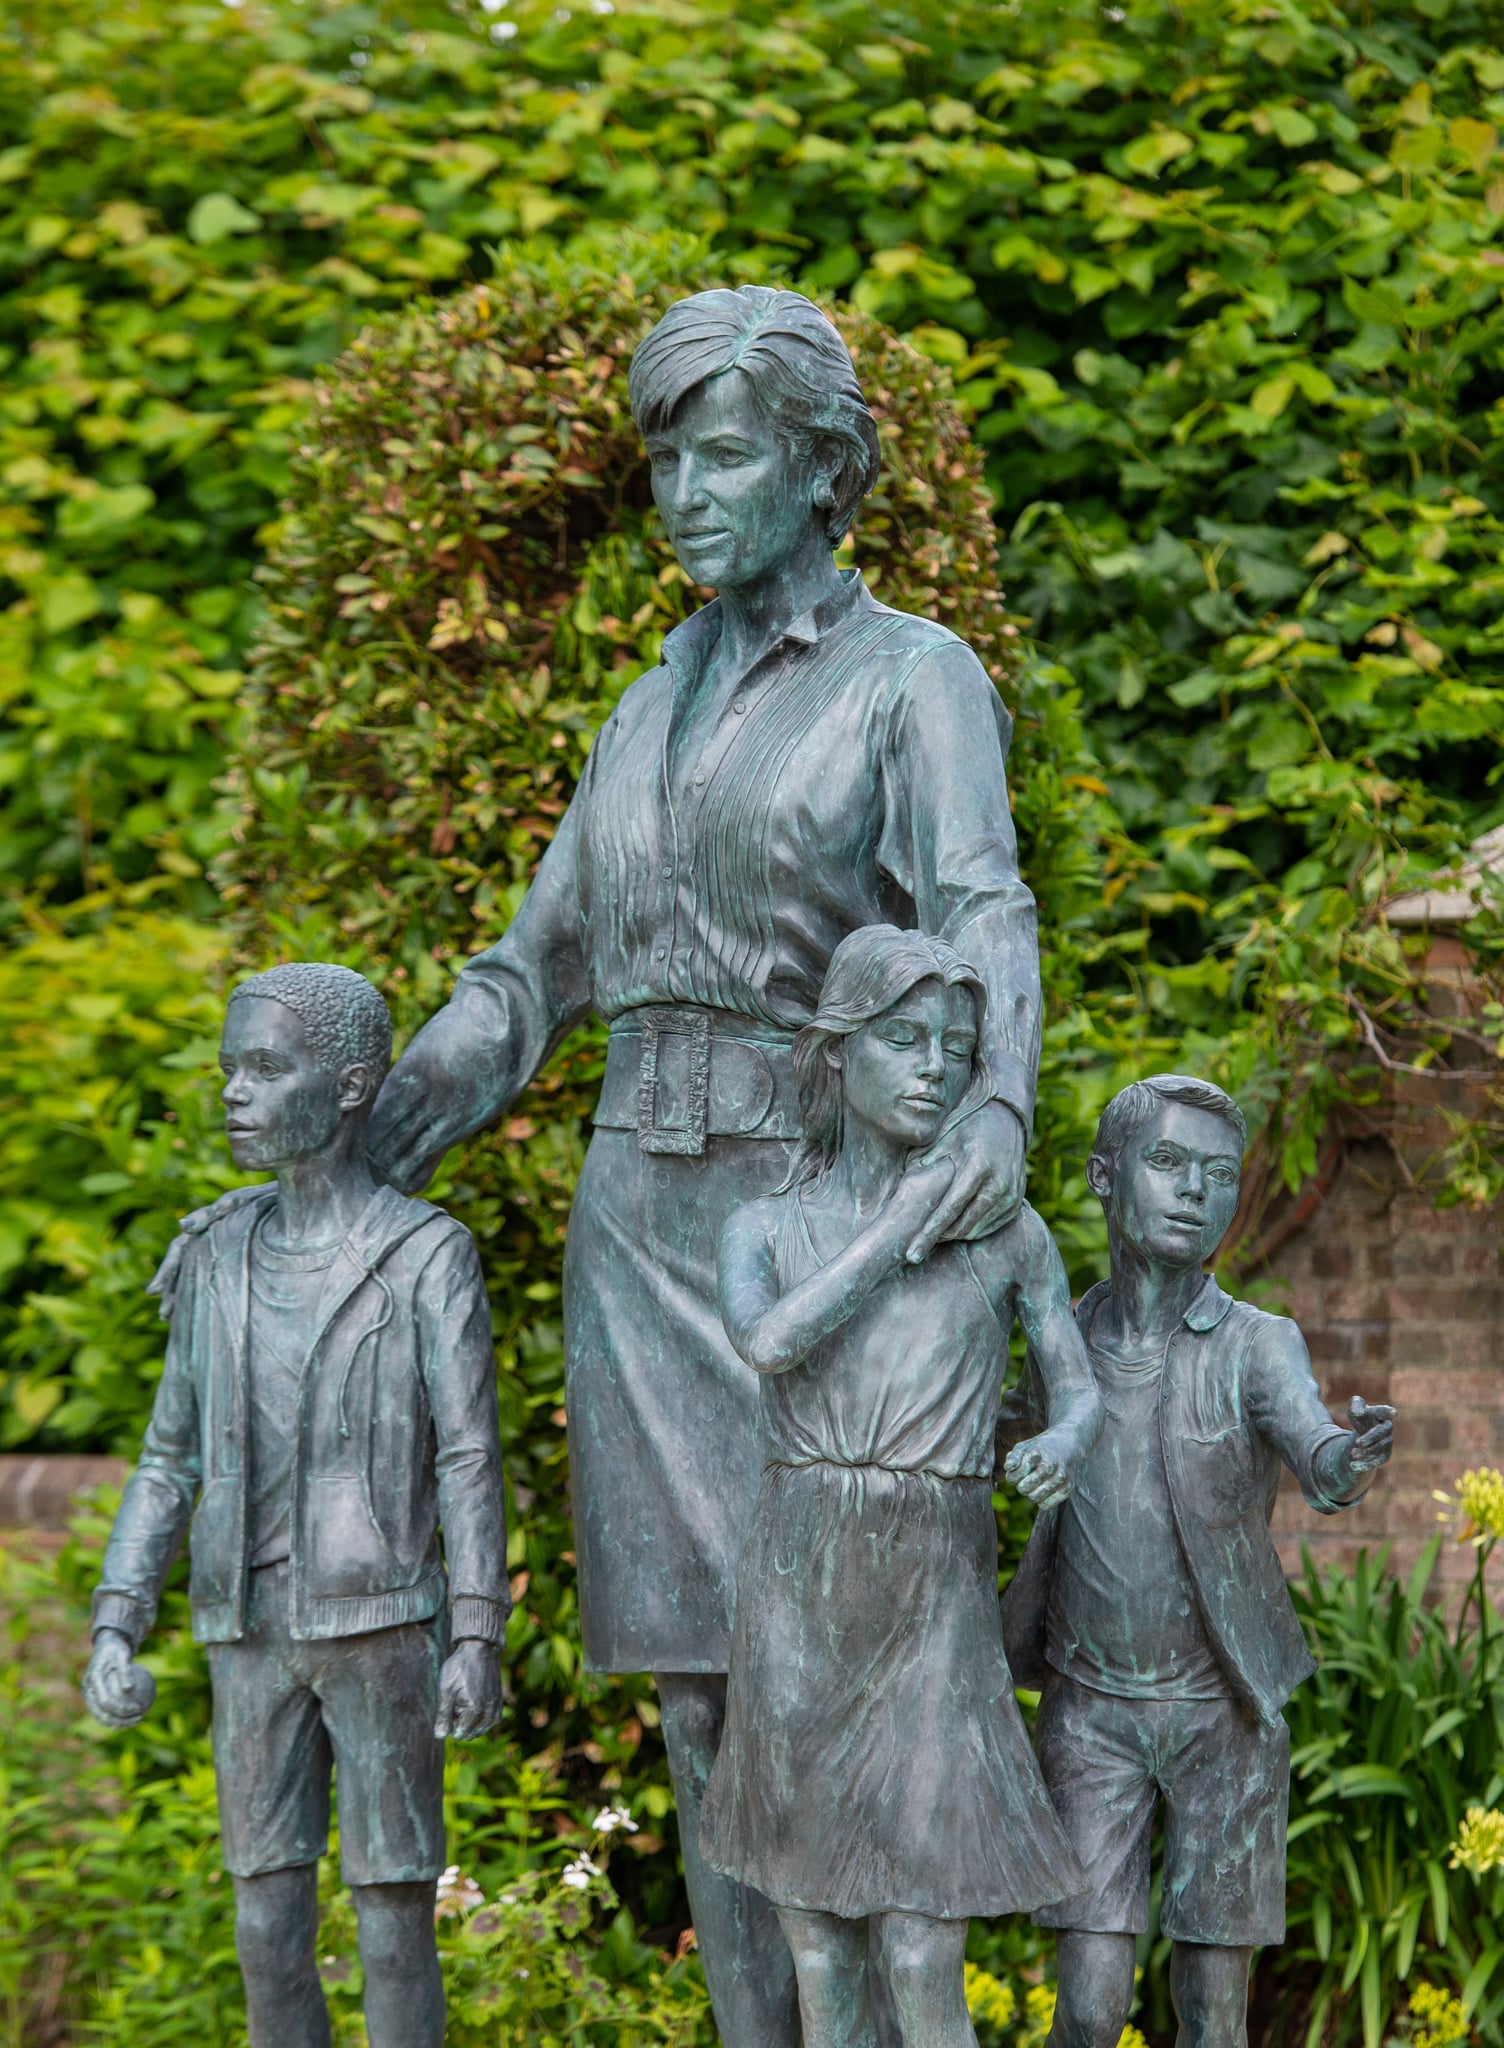 The Princess Diana Statue in The Sunken Garden at Kensington Palace, Prince William and Prince Harry Honour Princess Diana's “Love, Strength and  Character” With New Statue